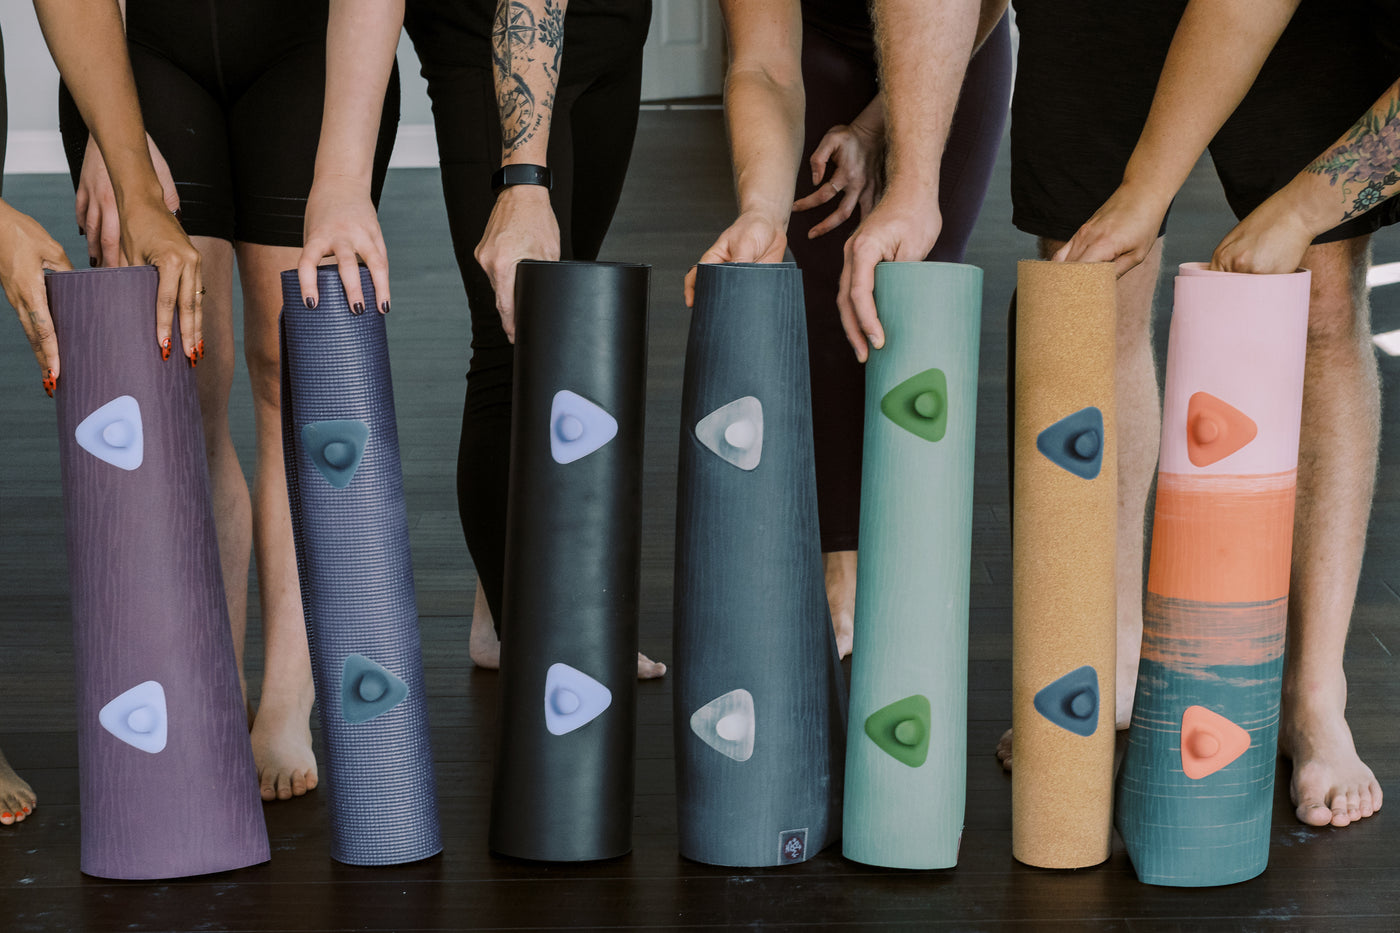 rubber yoga mats with yoga props as wrist support 